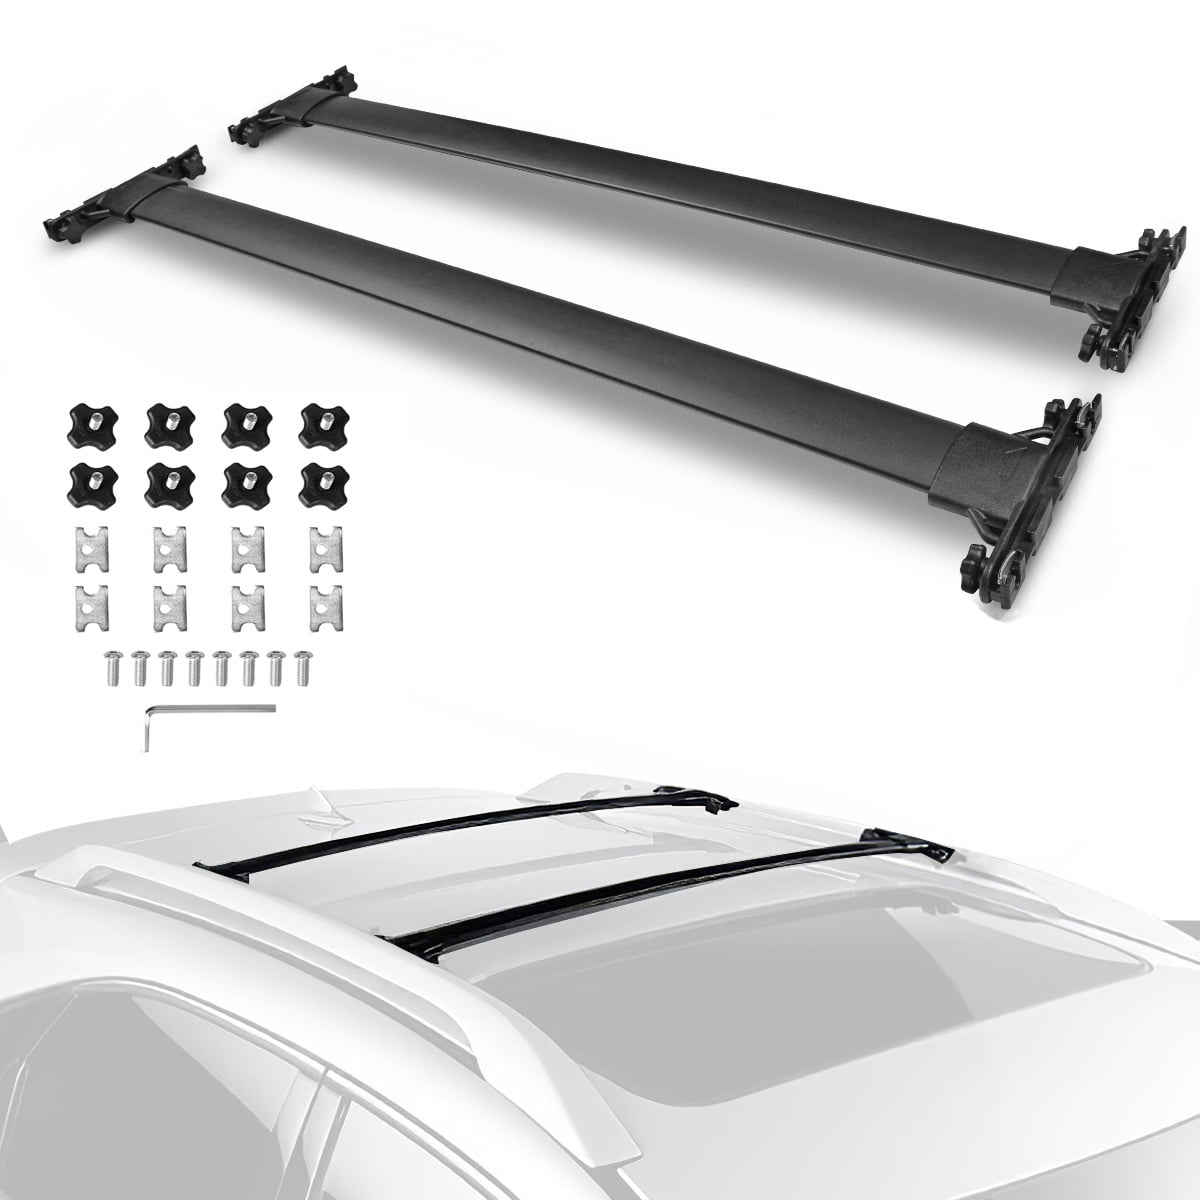 MOSTPLUS Roof Rack Cross Bars Rail Compatible with Ford Escape 2014 2015 2016 2017 2018 2019 Cargo Racks Rooftop Luggage Canoe Kayak Carrier Rack